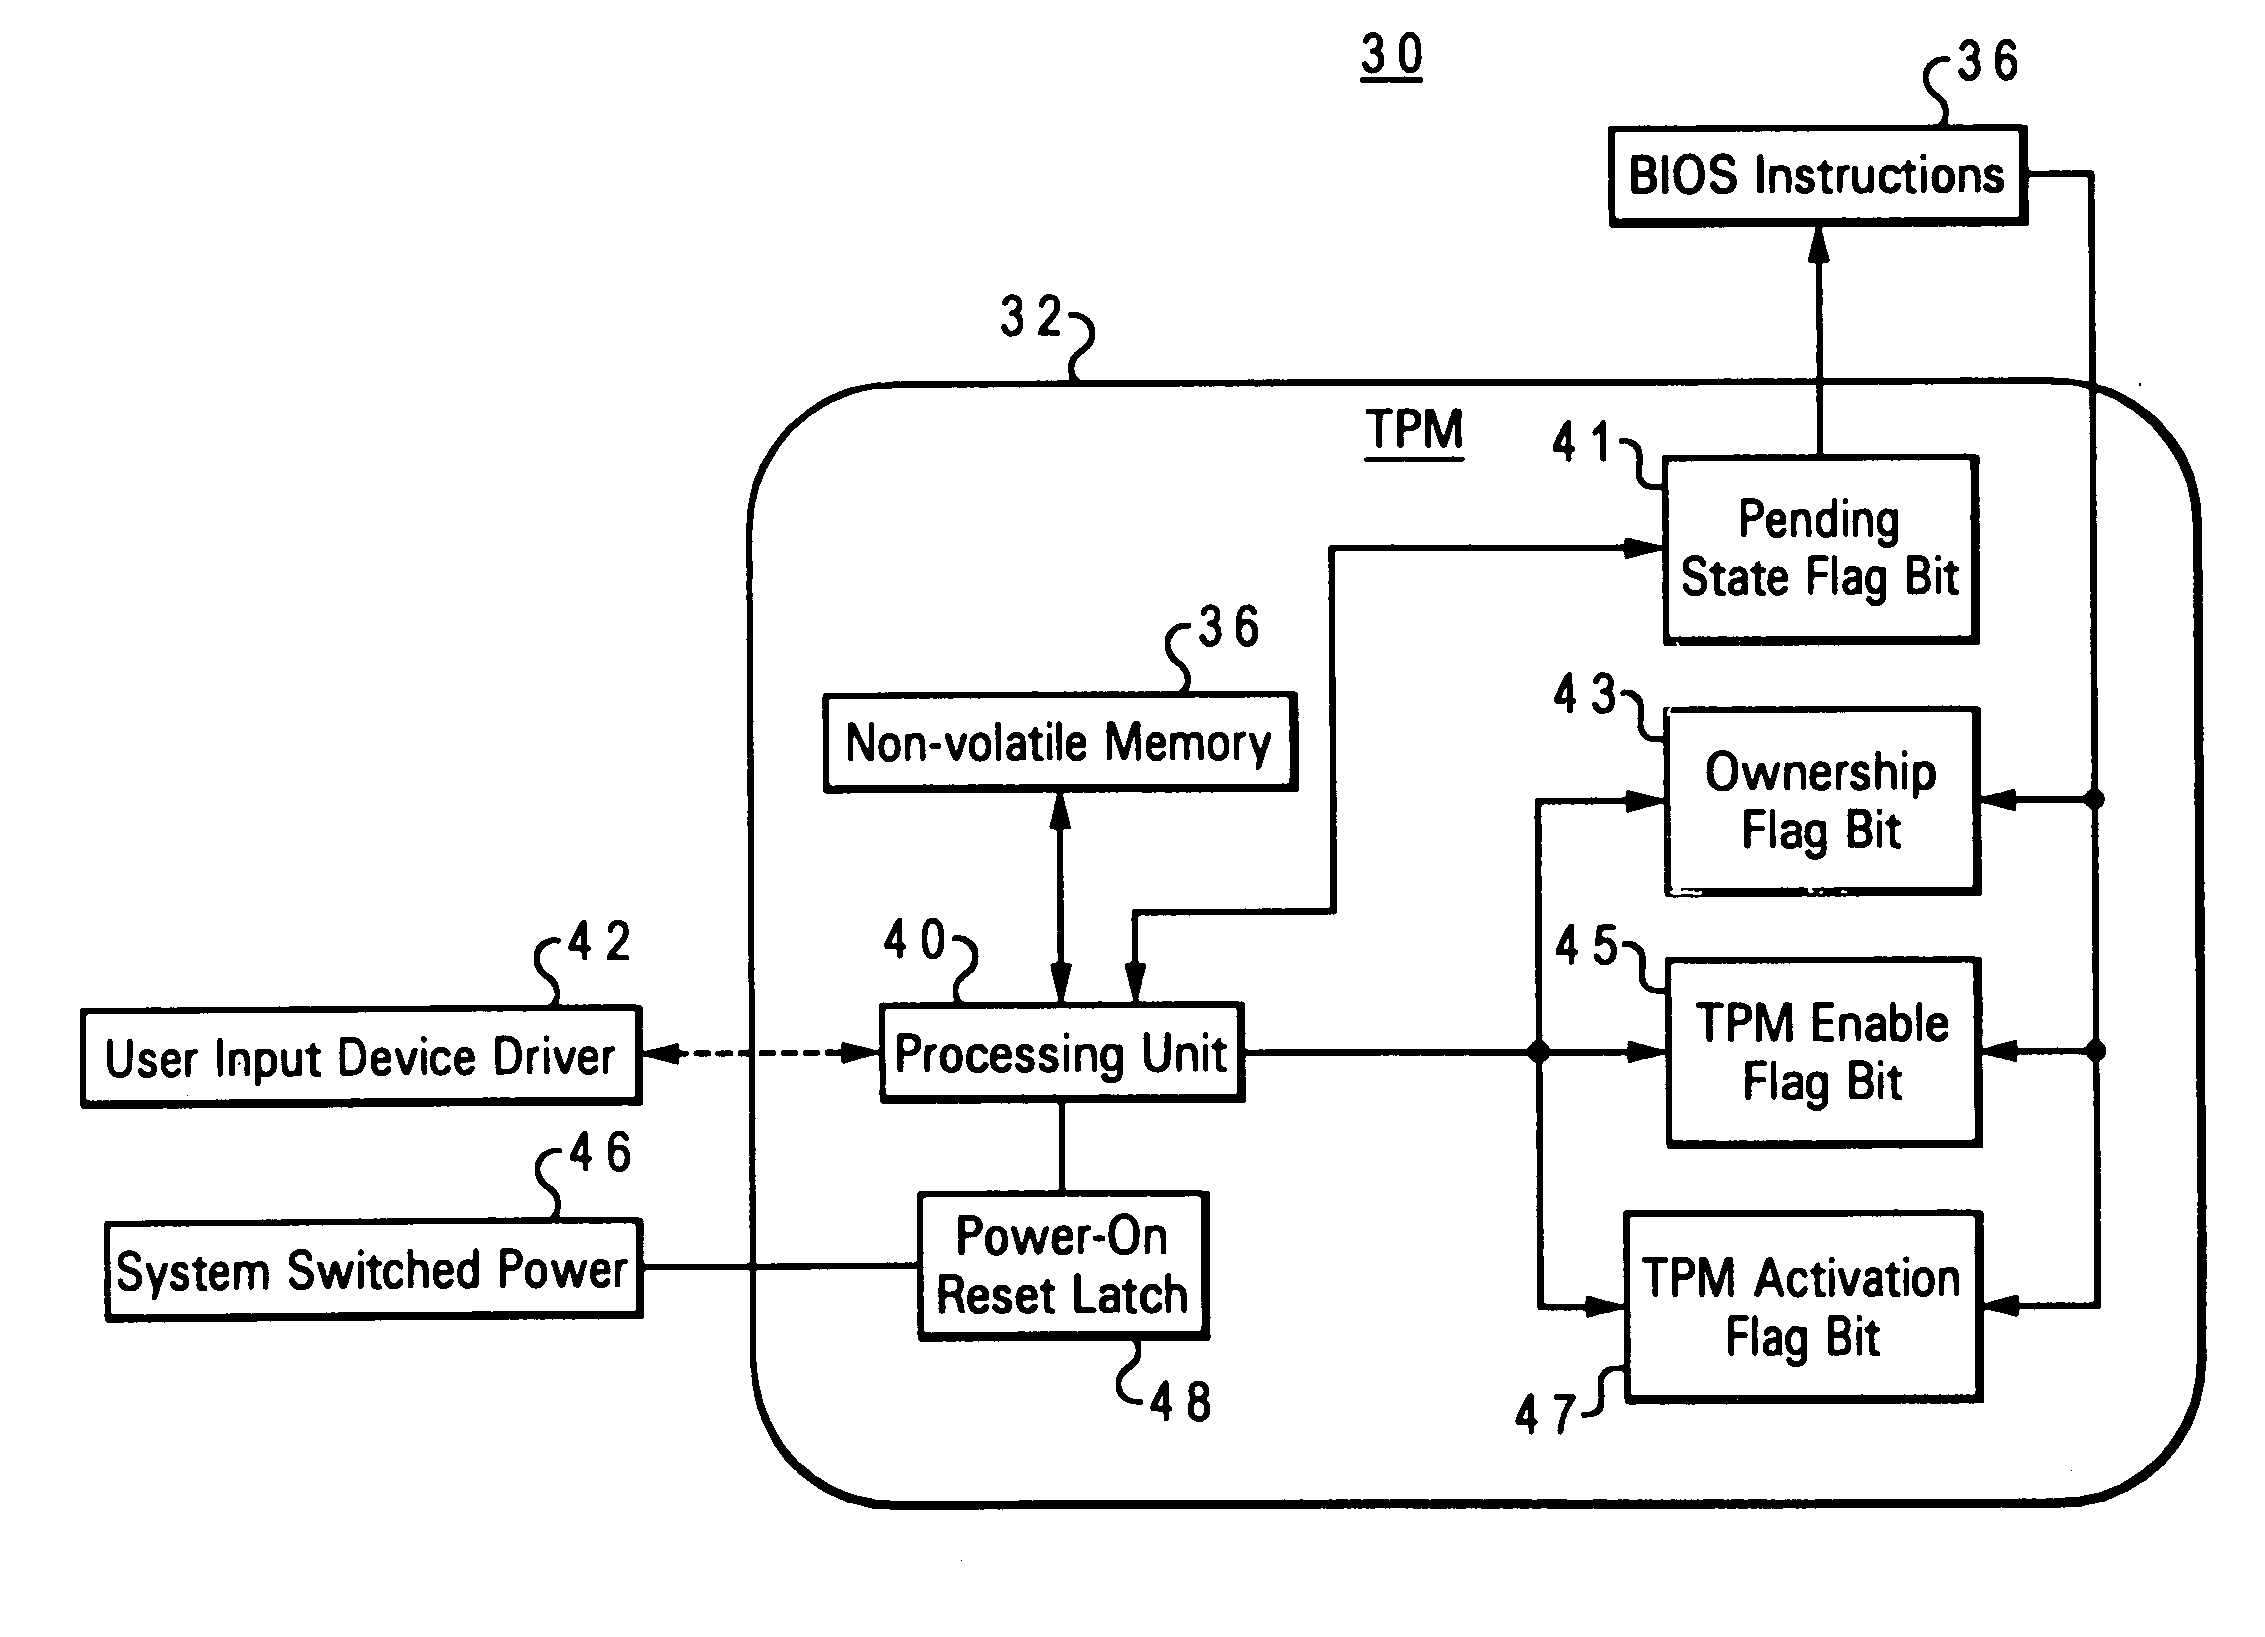 Method and system for securing enablement access to a data security device